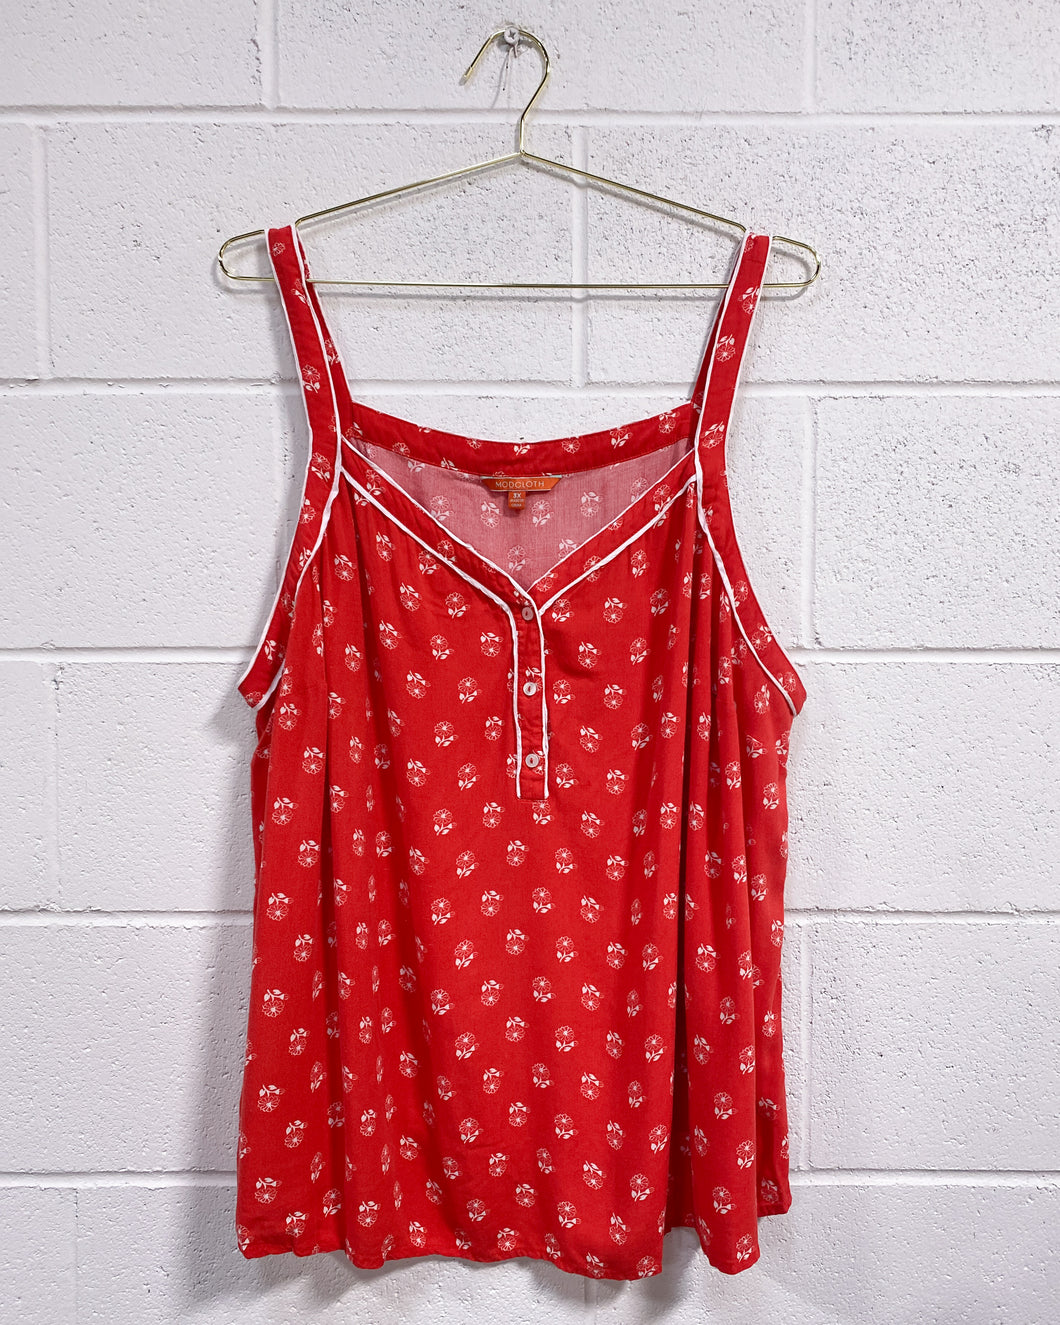 Modcloth Red Tank Top (3X)